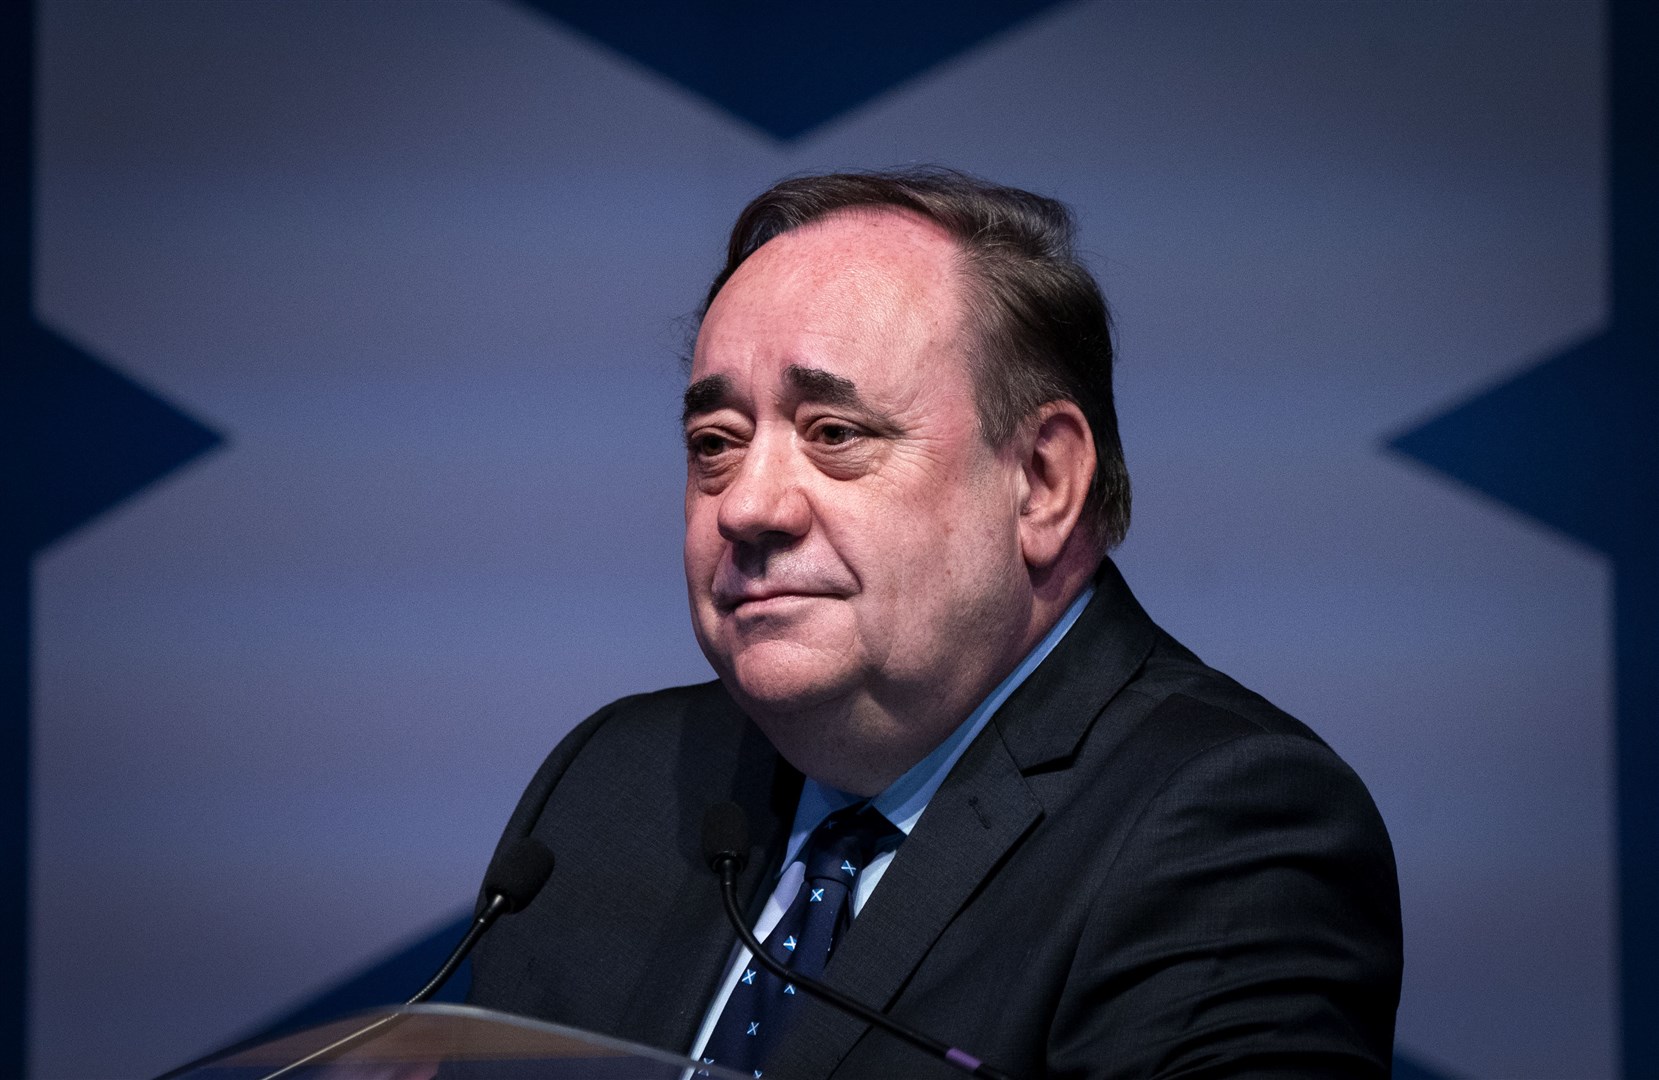 Alex Salmond appeared before the Scottish Affairs Committee on Tuesday (Jane Barlow/PA)